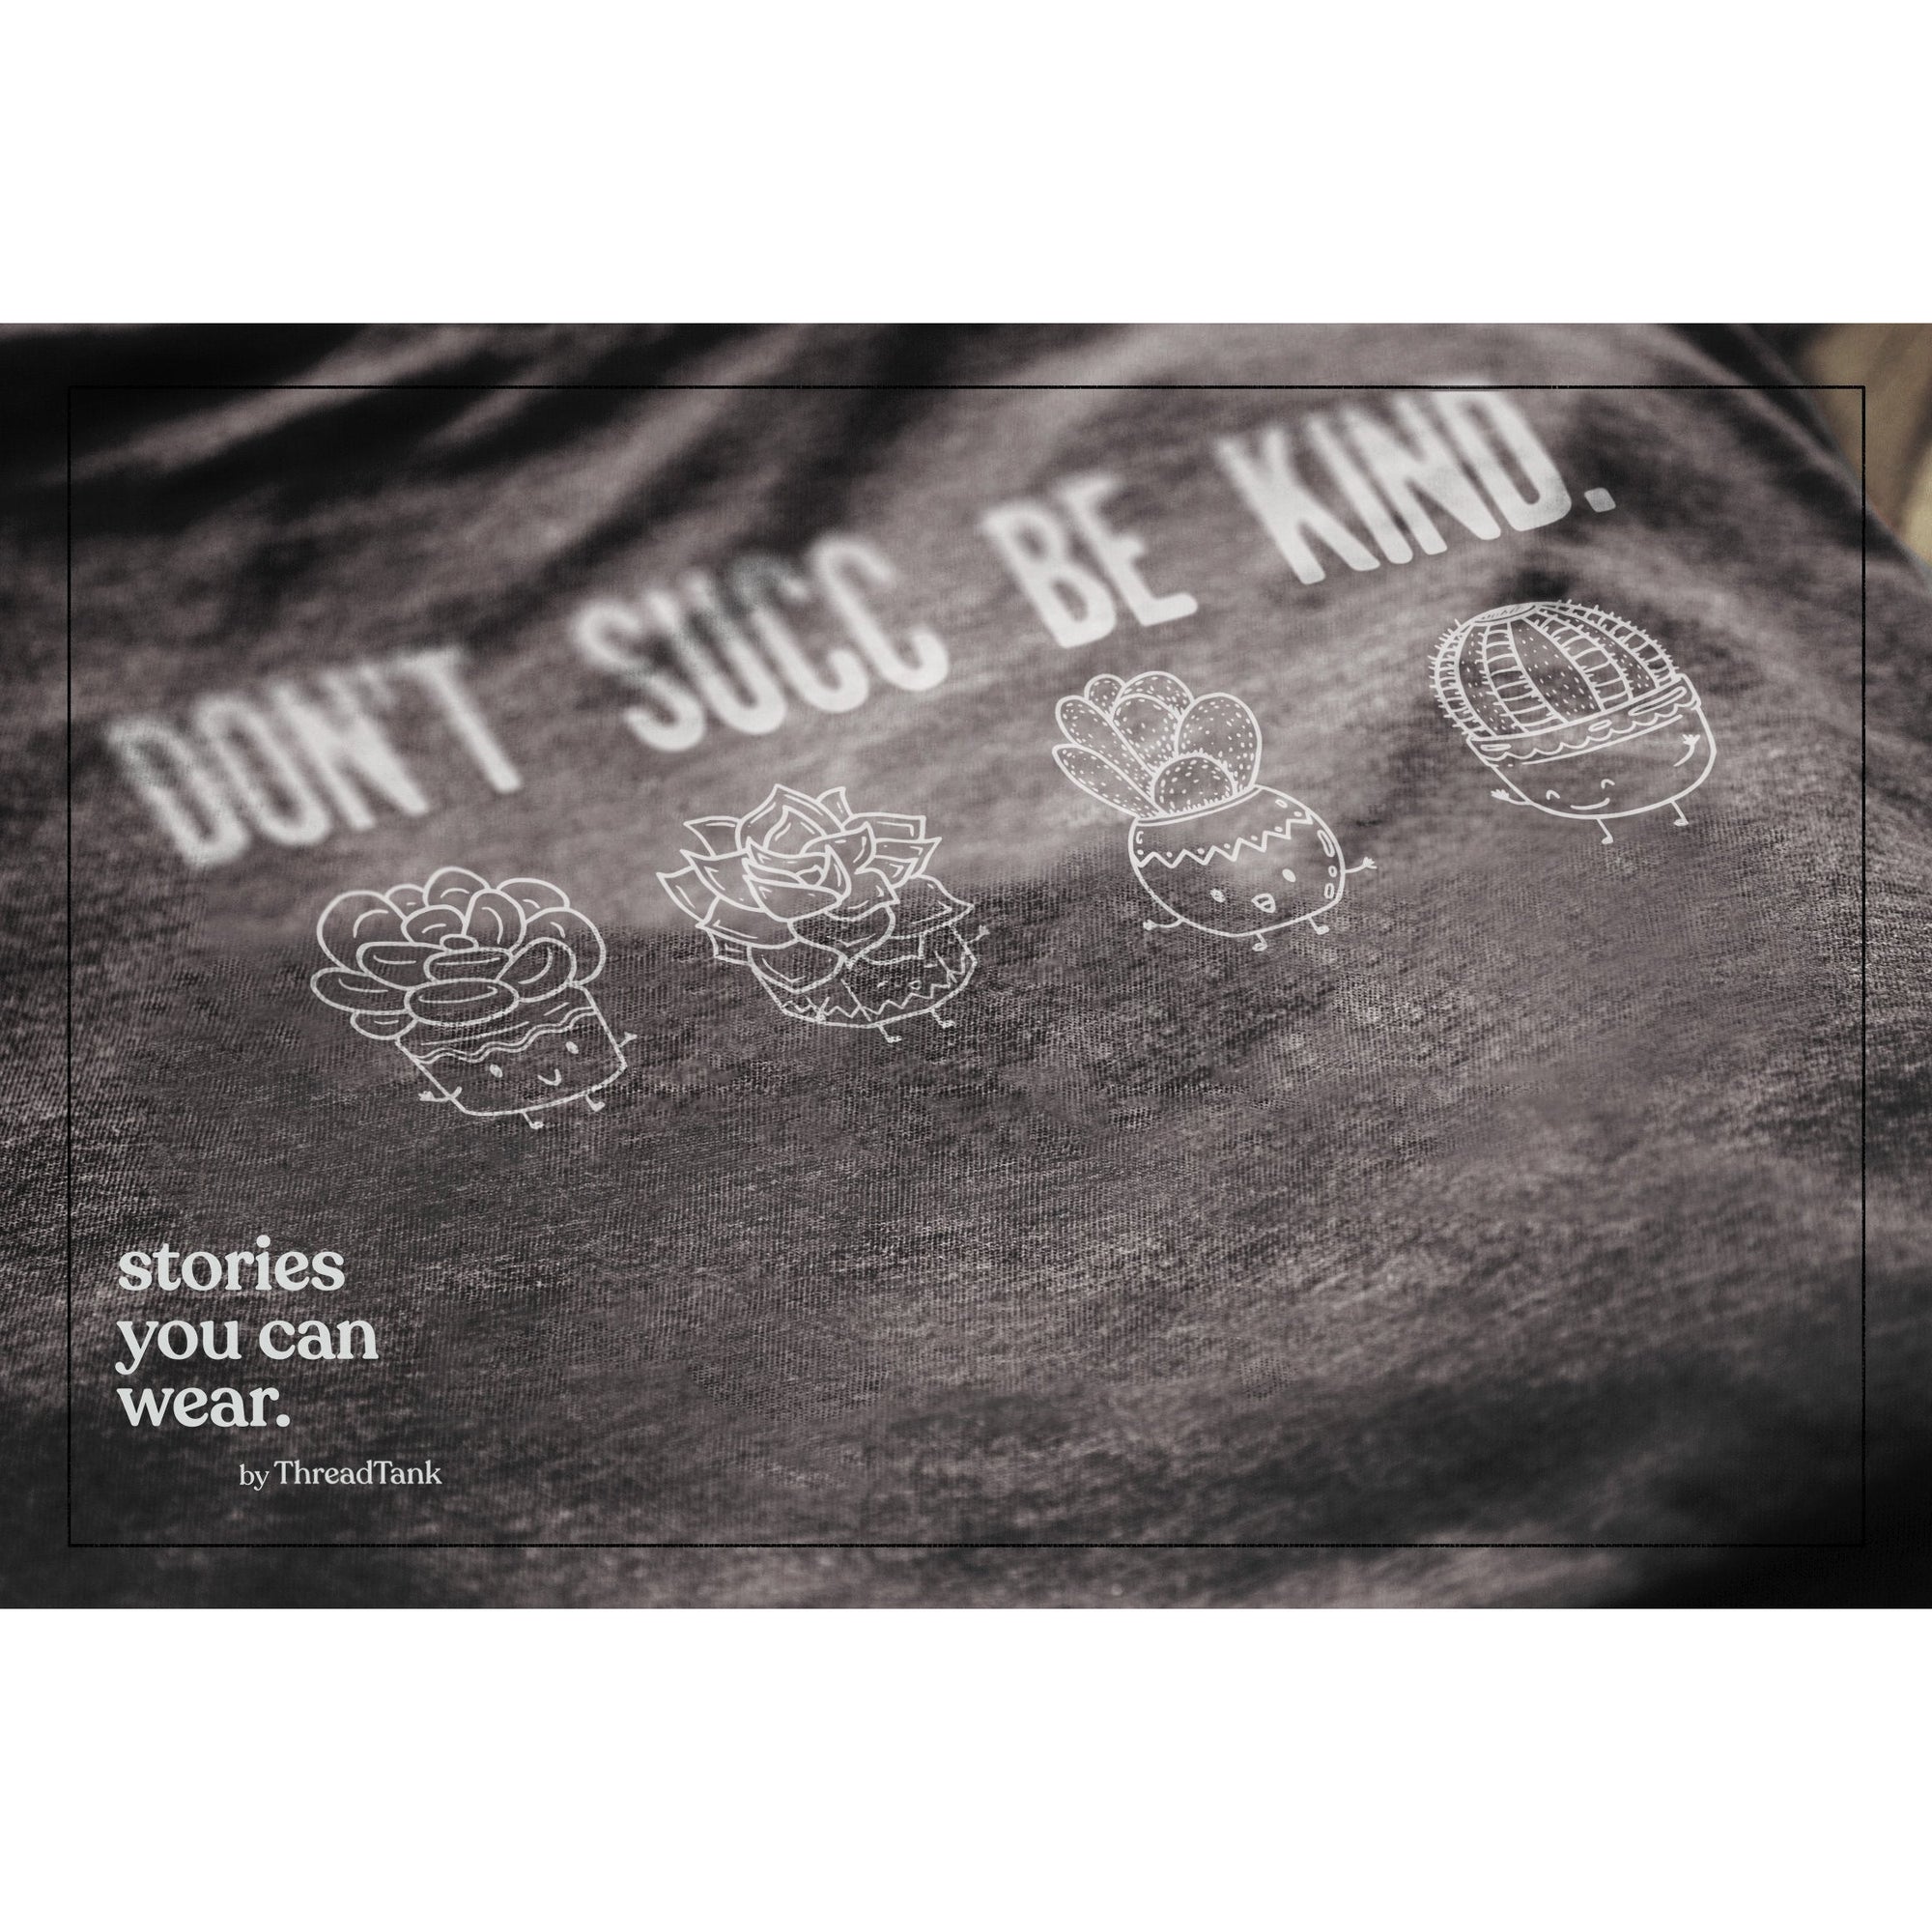 Don't Succ Be Kind Charcoal Printed Graphic Crew T-Shirt Tee CLOSEUP